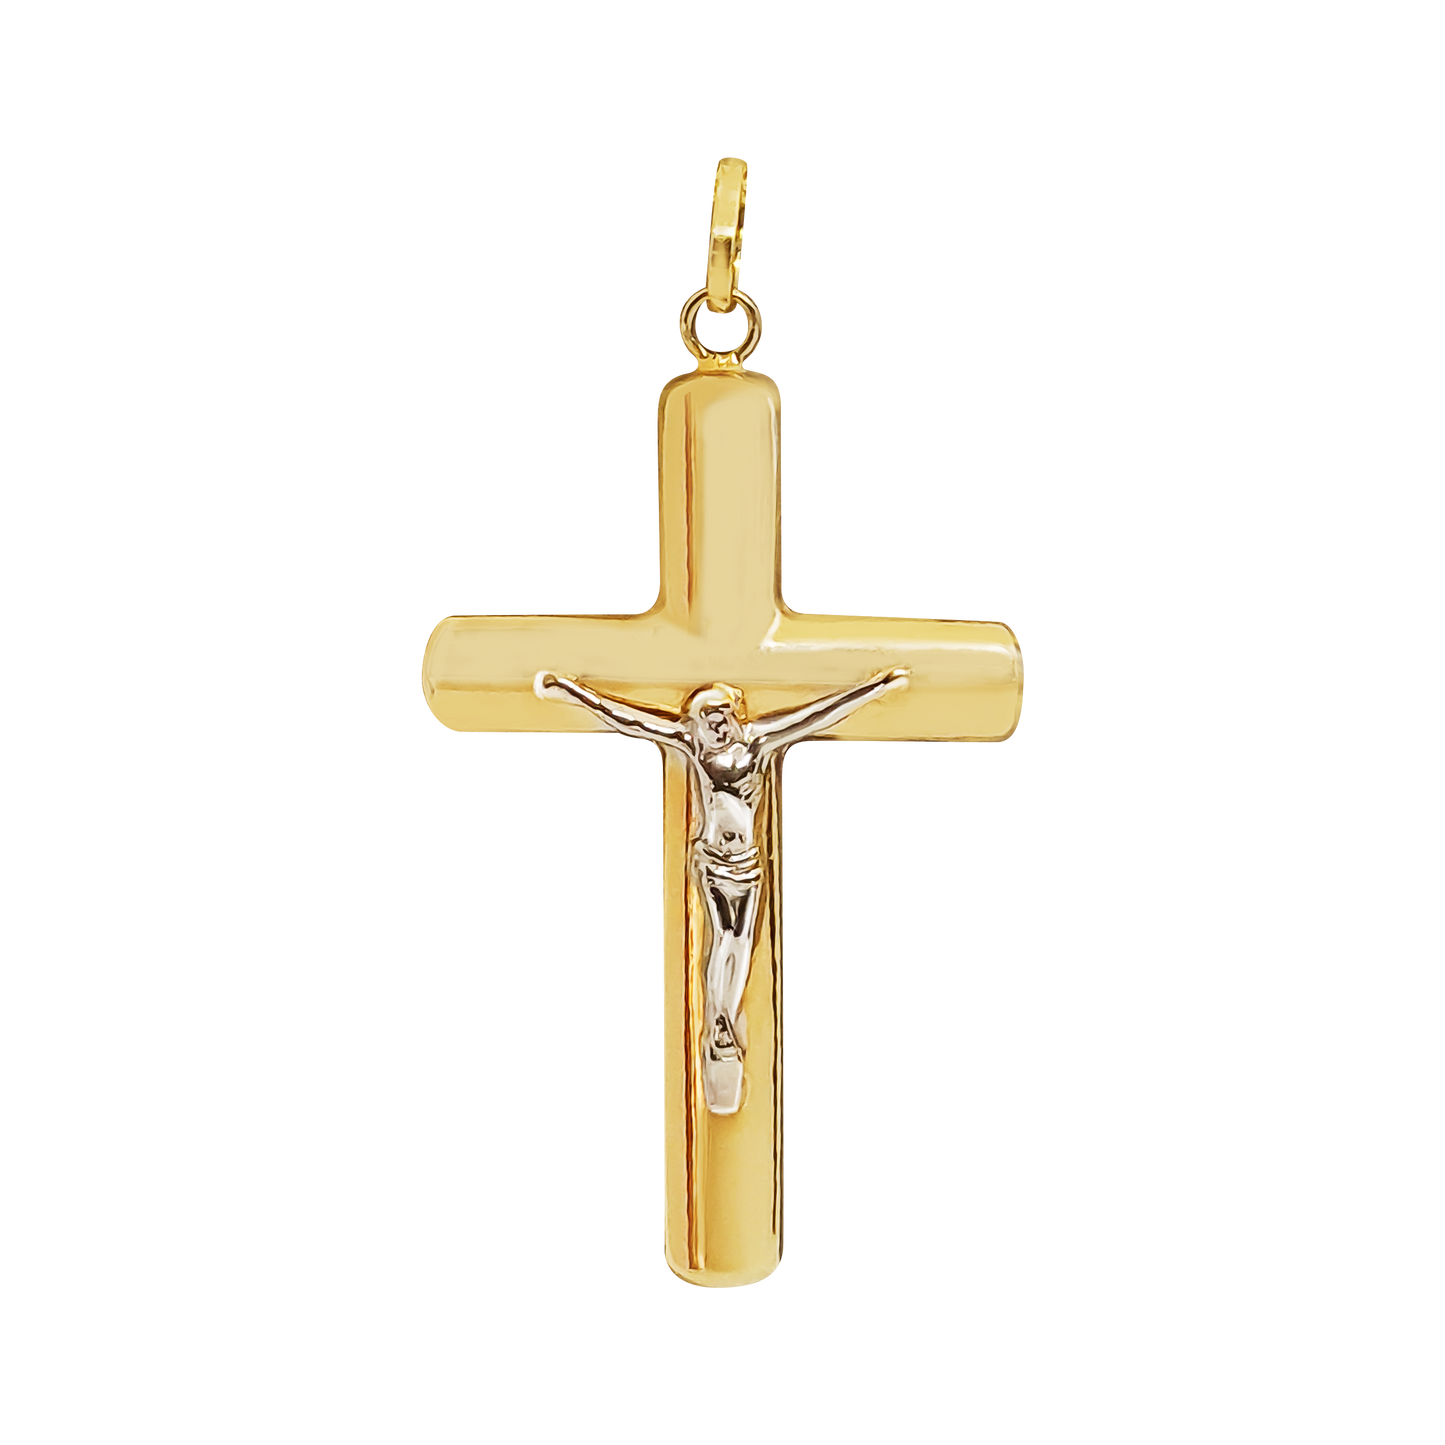 300mm Two-Tone Crucifix Pendant in 9ct Yellow Gold.